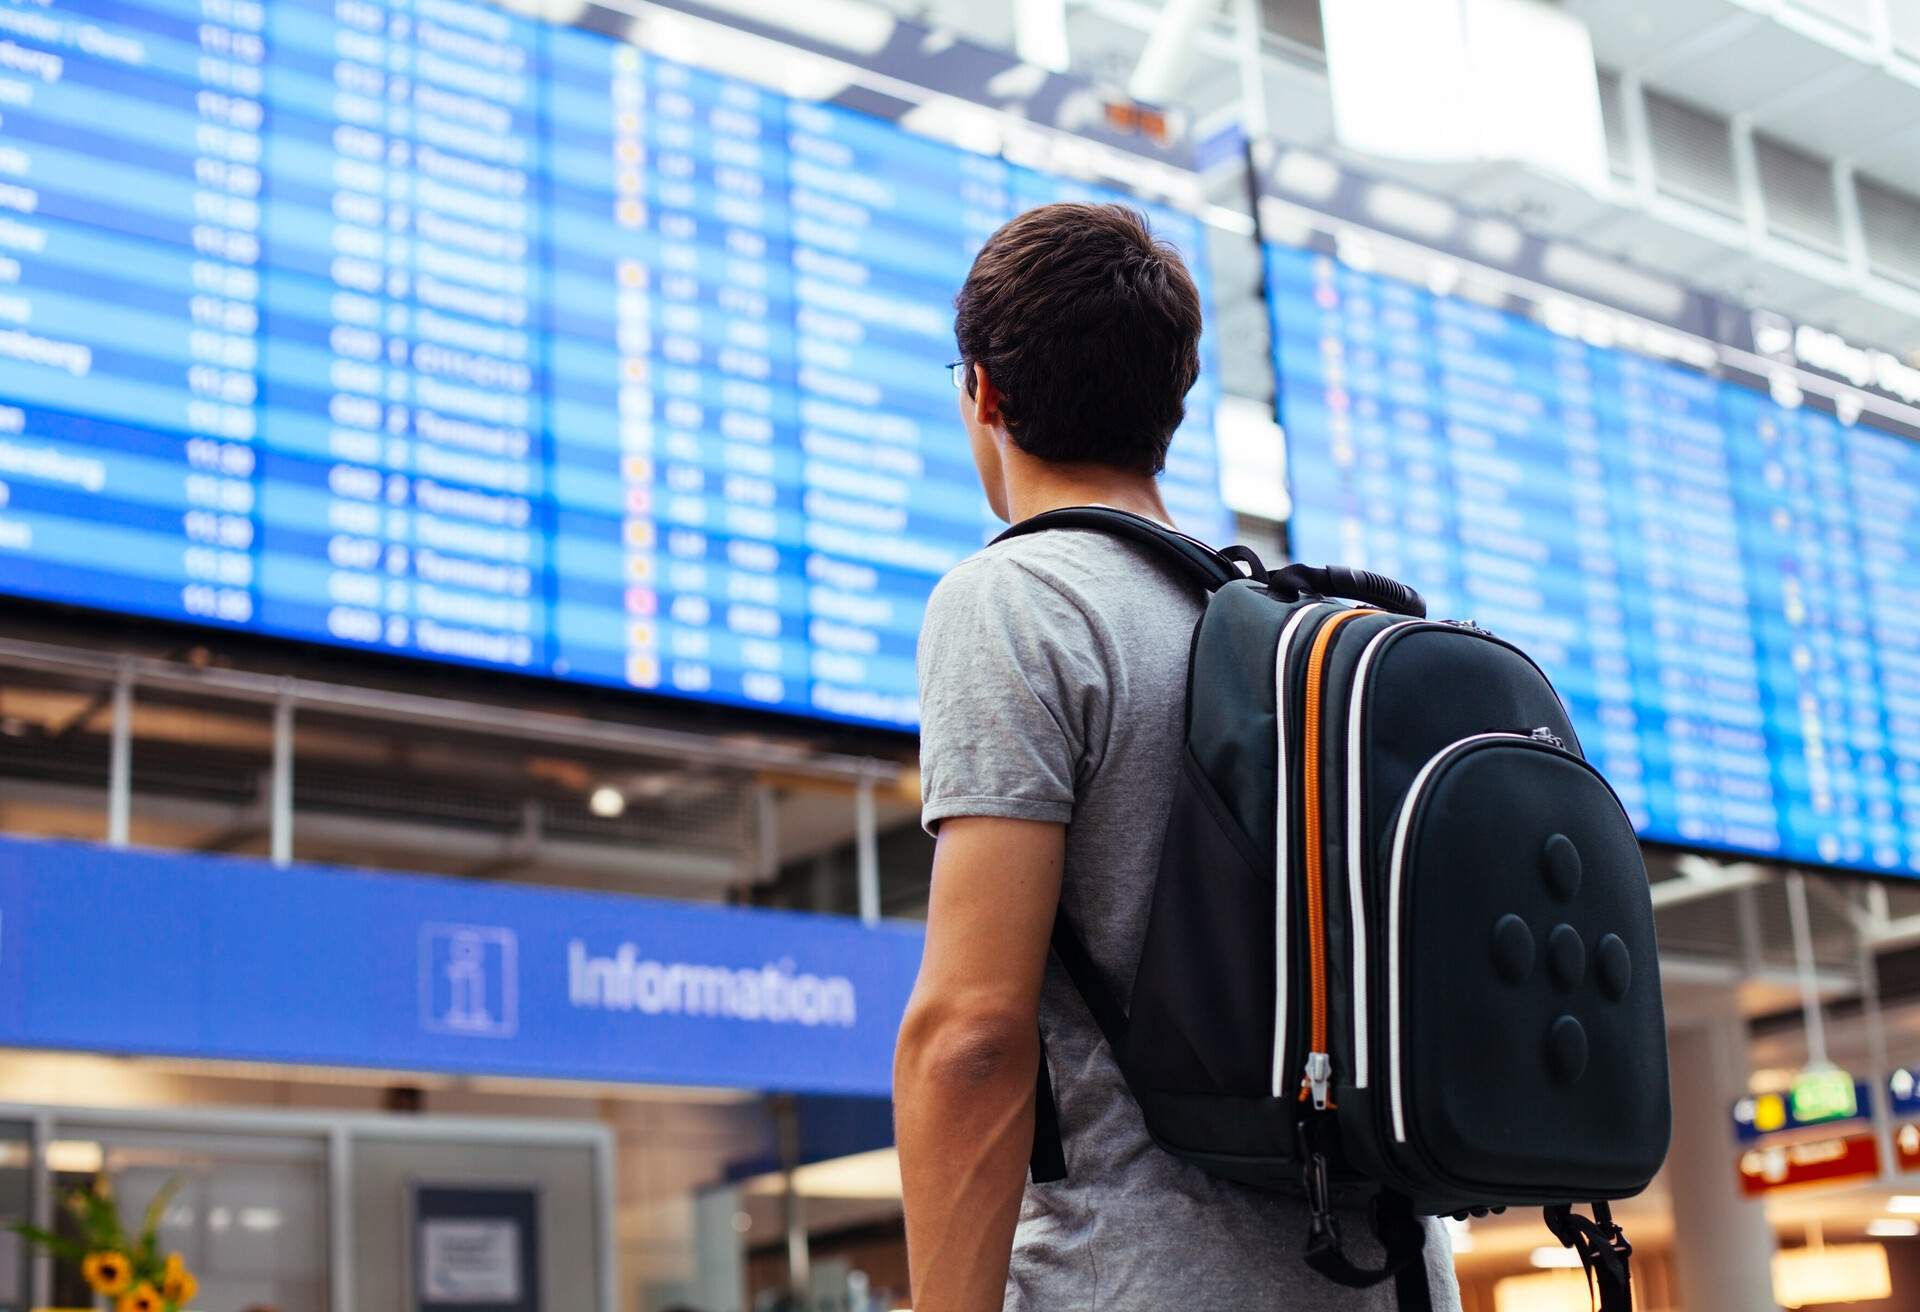 A man carrying a backpack checking the flight information display at the airport.